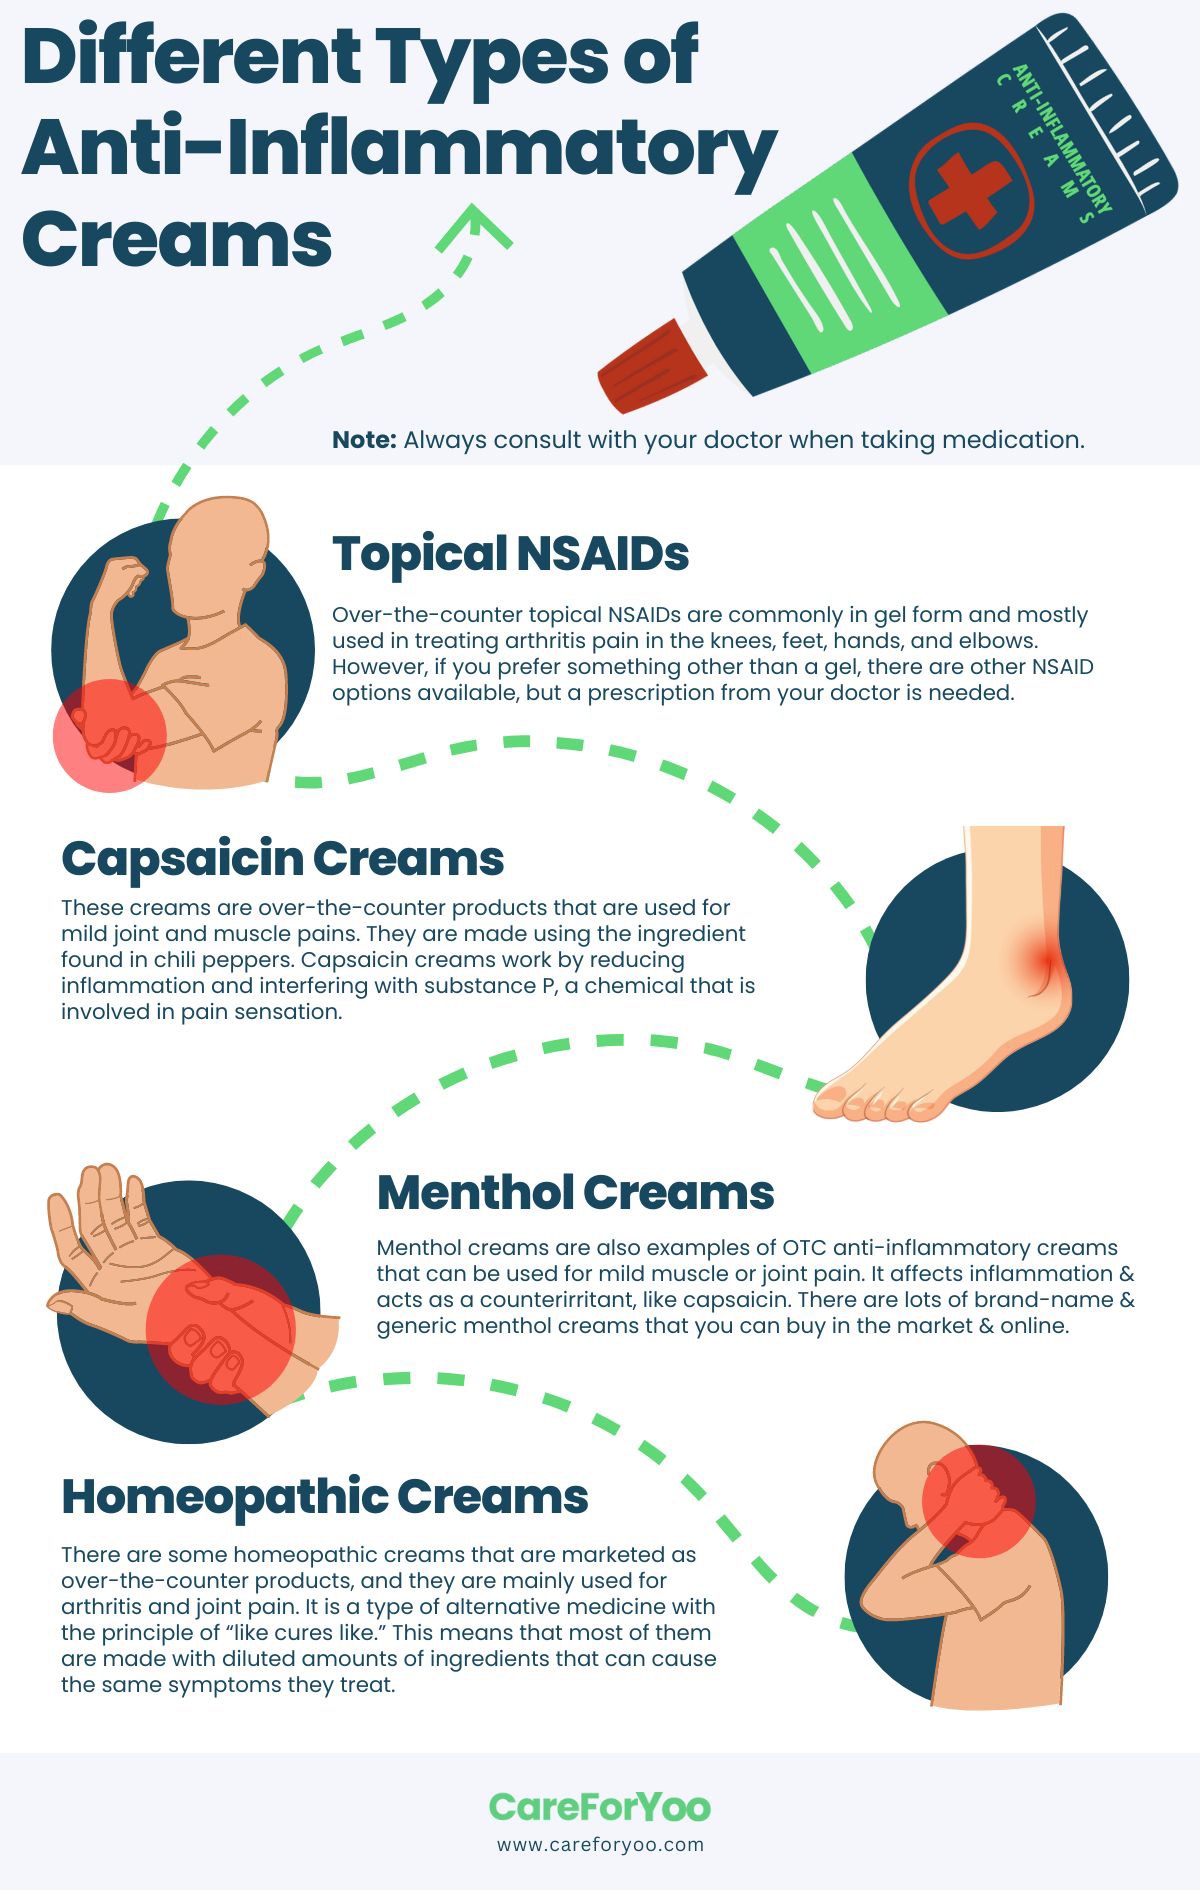 Different-Types-of-Anti-Inflammatory-Creams